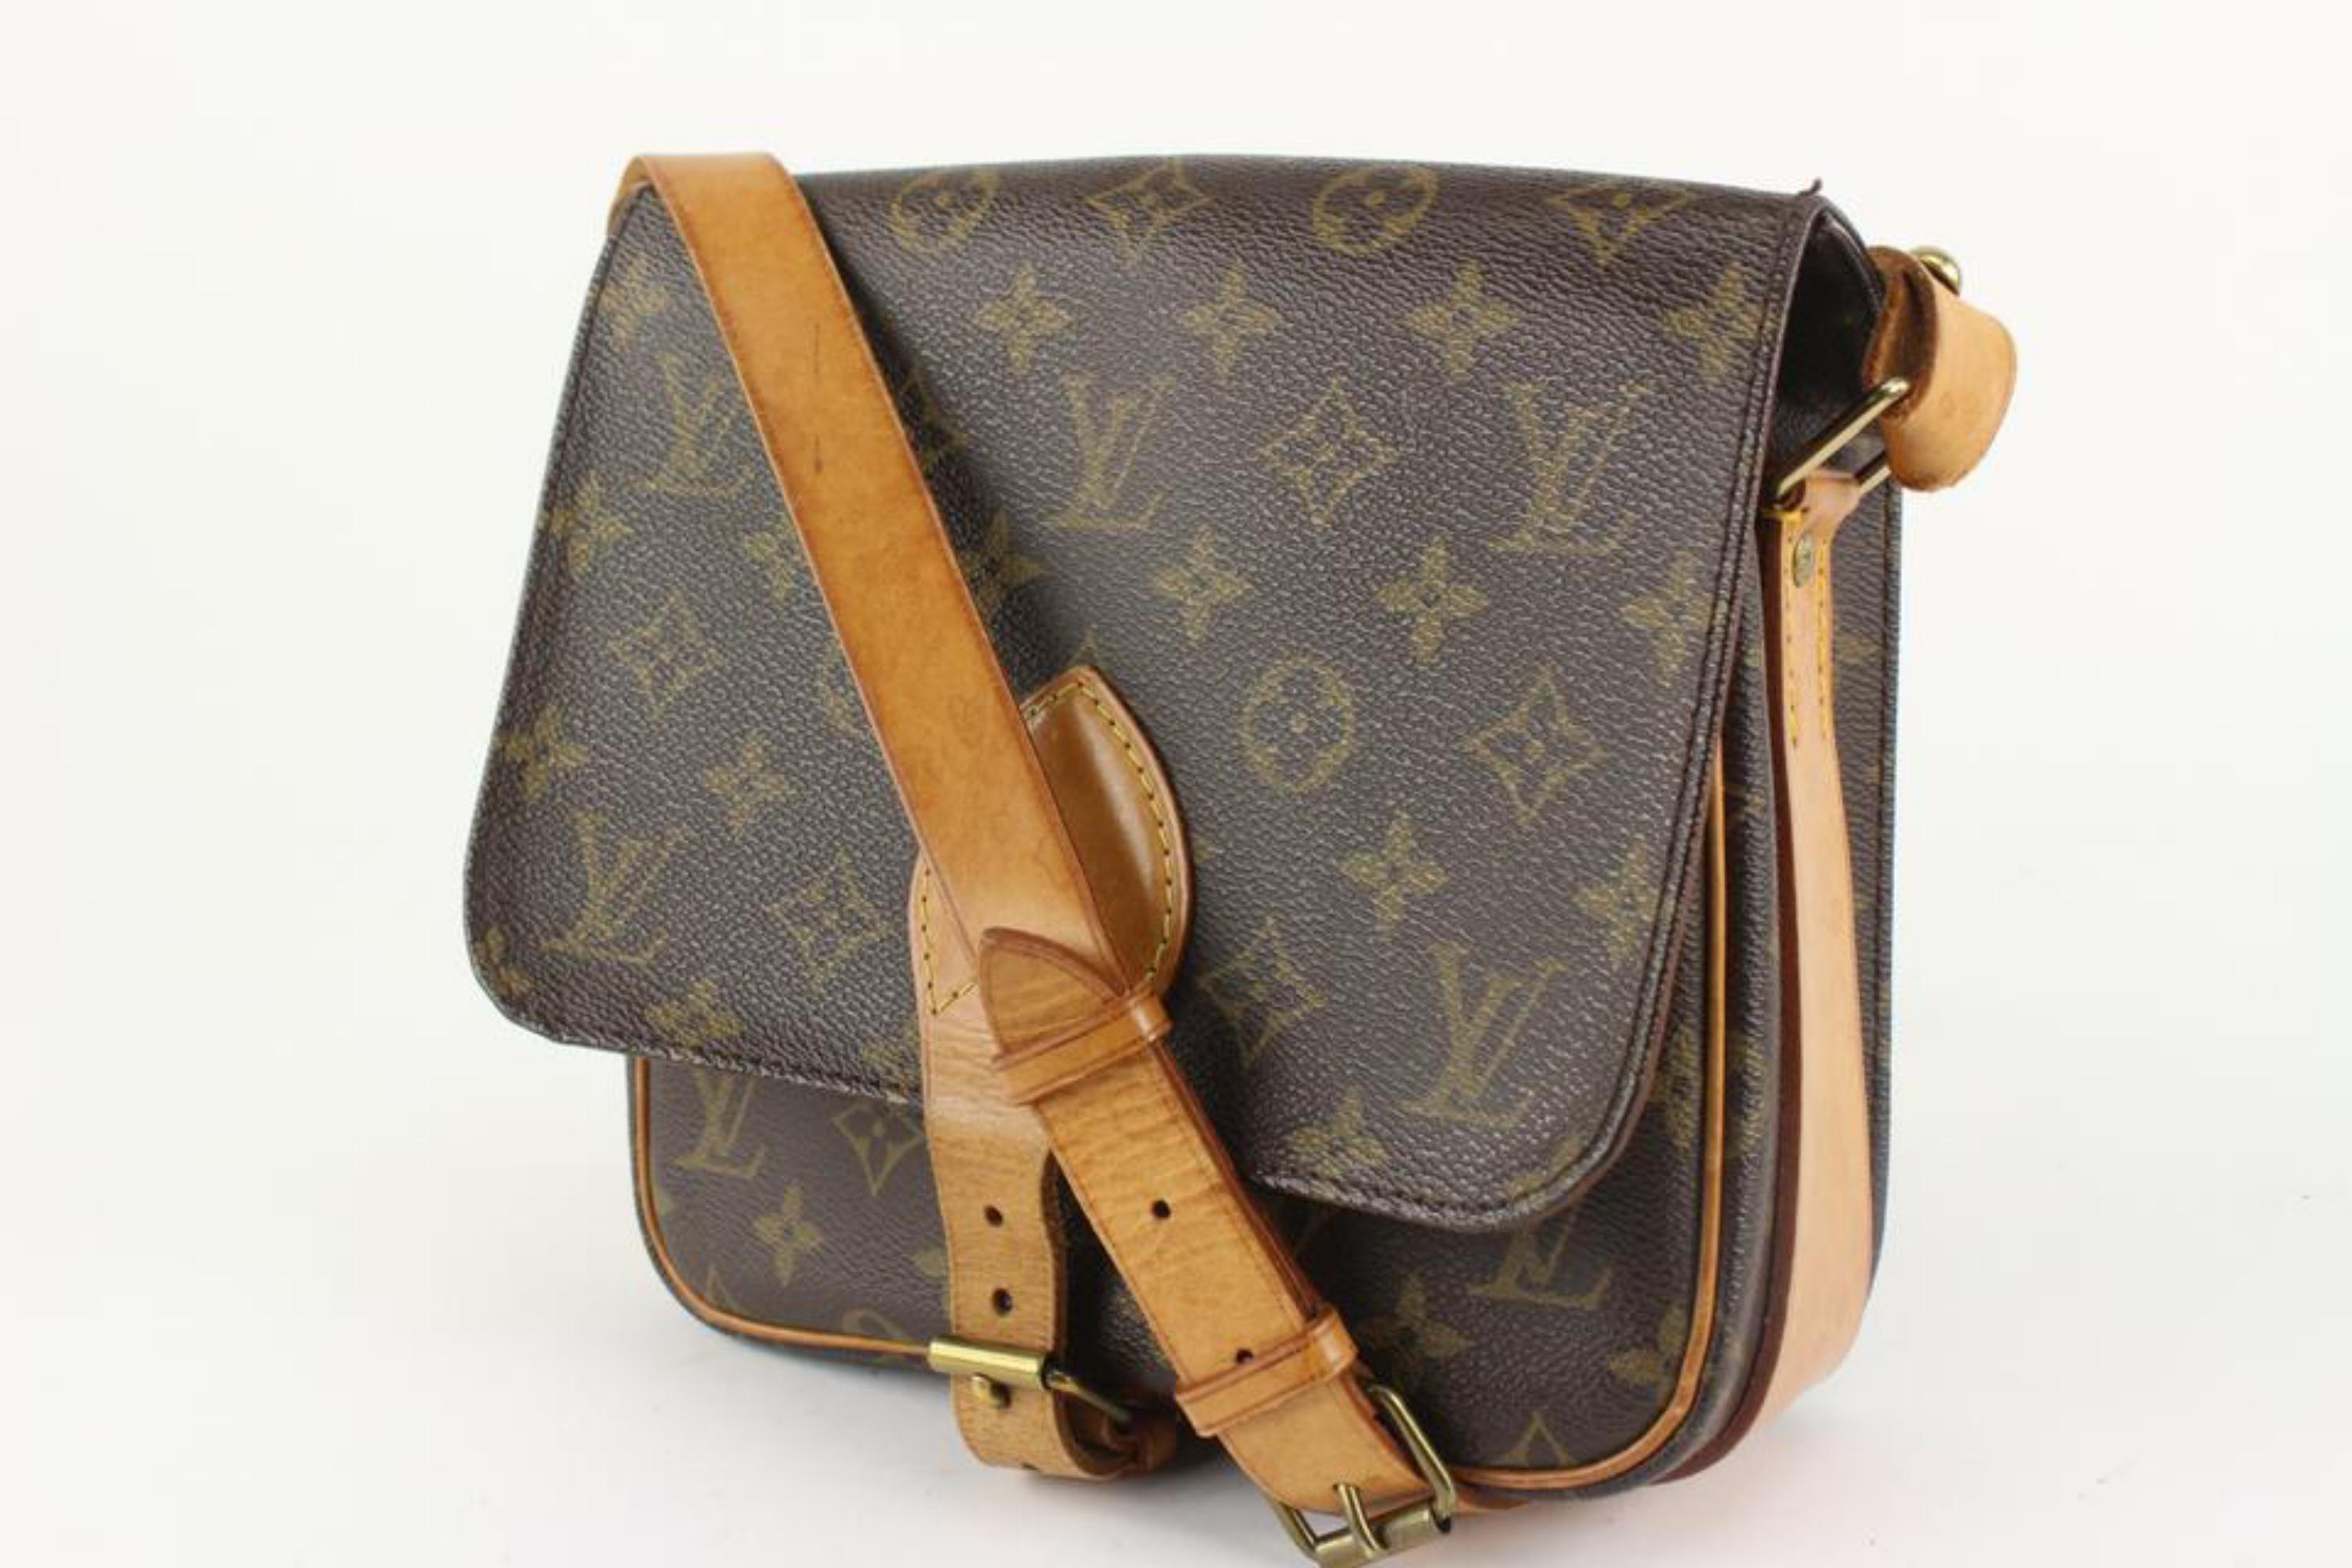 Louis Vuitton Monogram Cartouchiere MM Crossbody Bag 1220lv39
Date Code/Serial Number: SD0964
Made In: U.S.A
Measurements: Length:  8